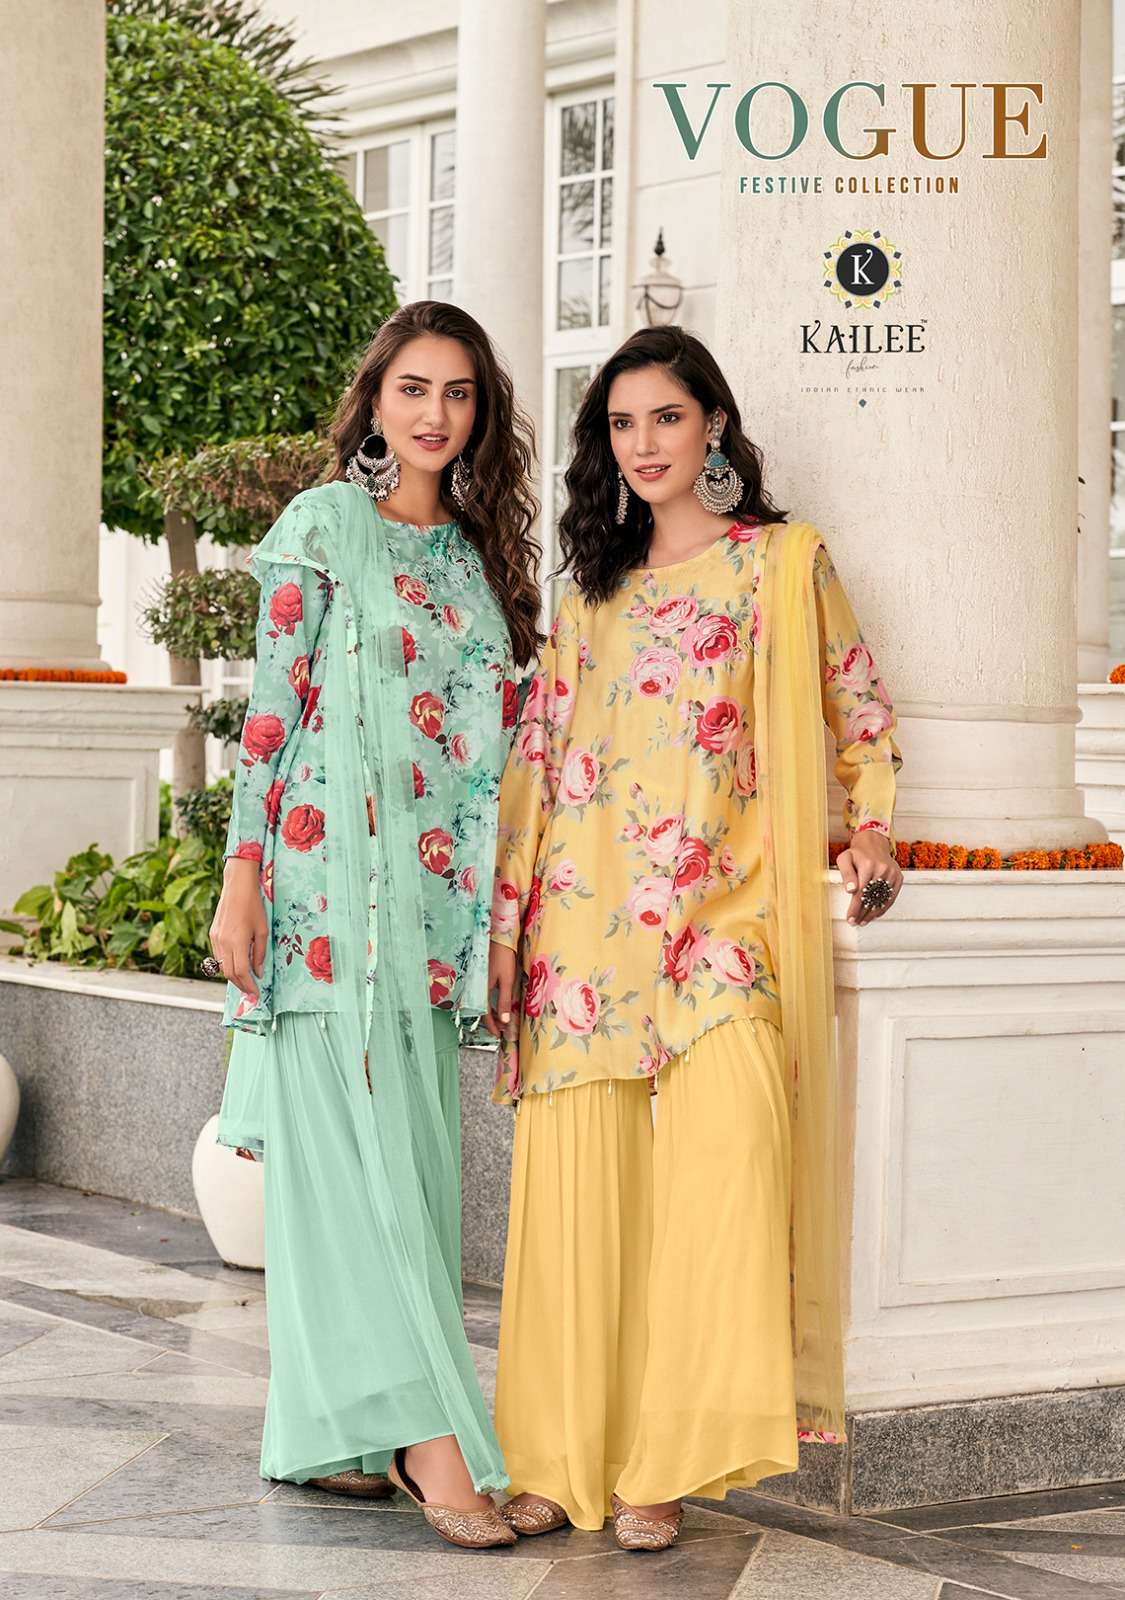 Vogue By Kailee 30001 To 30004 Series Sharara Suits Beautiful Fancy Colorful Stylish Party Wear & Occasional Wear Pure Cotton With Embroidery Dresses At Wholesale Price